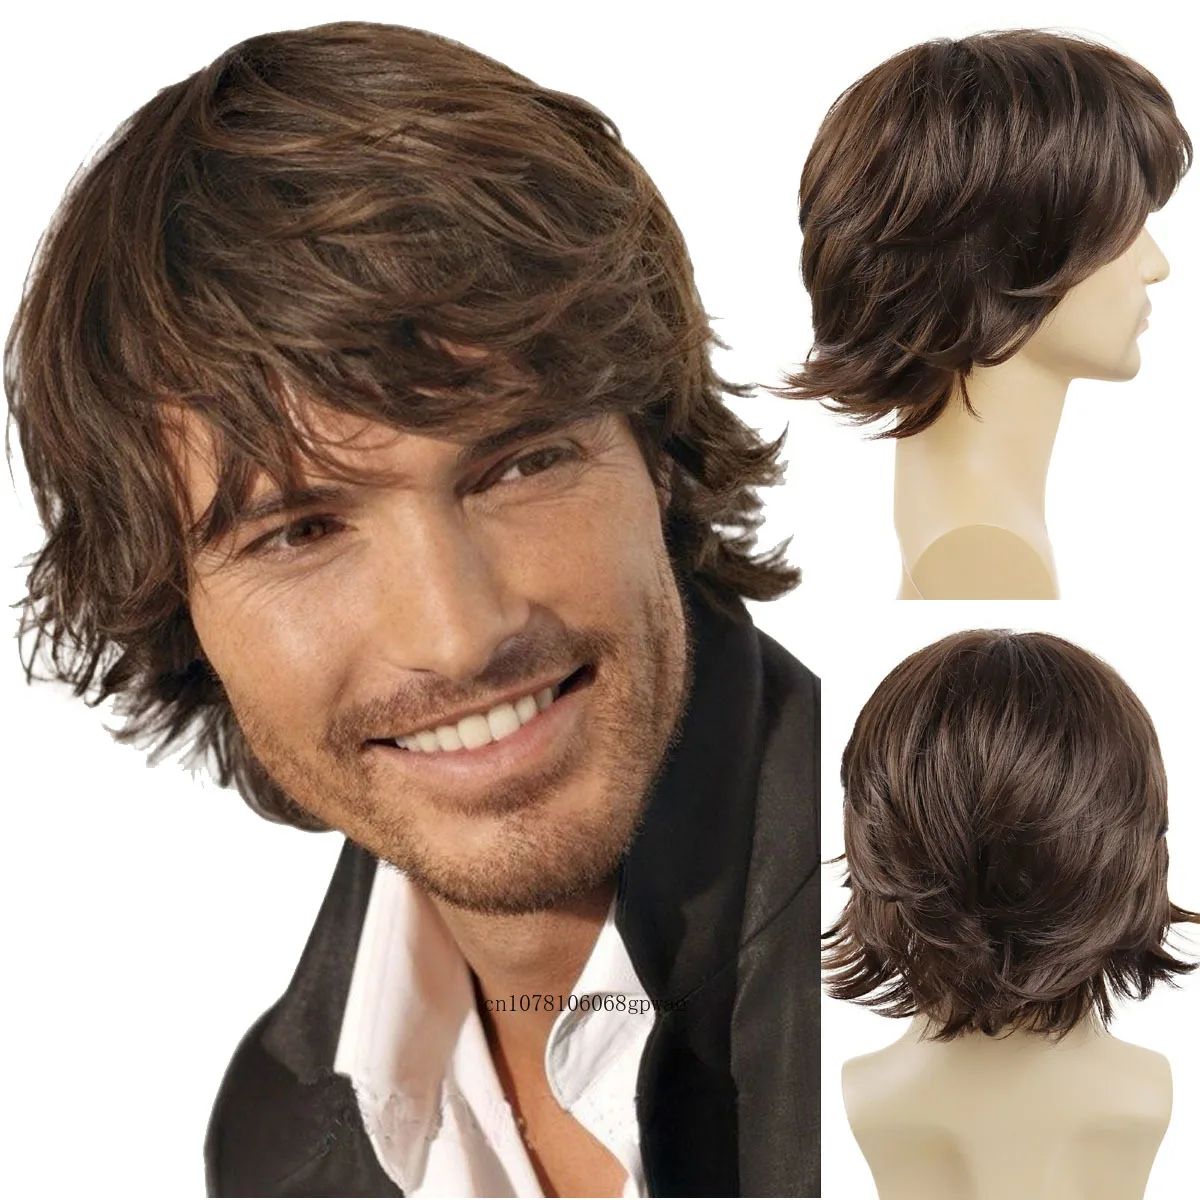 Brown Wigs for Men Synthetic Short Wig with Bangs Wave Haircut Shaggy Hair Tail Daily Male Wig Heat Resistant Adjustable Cap